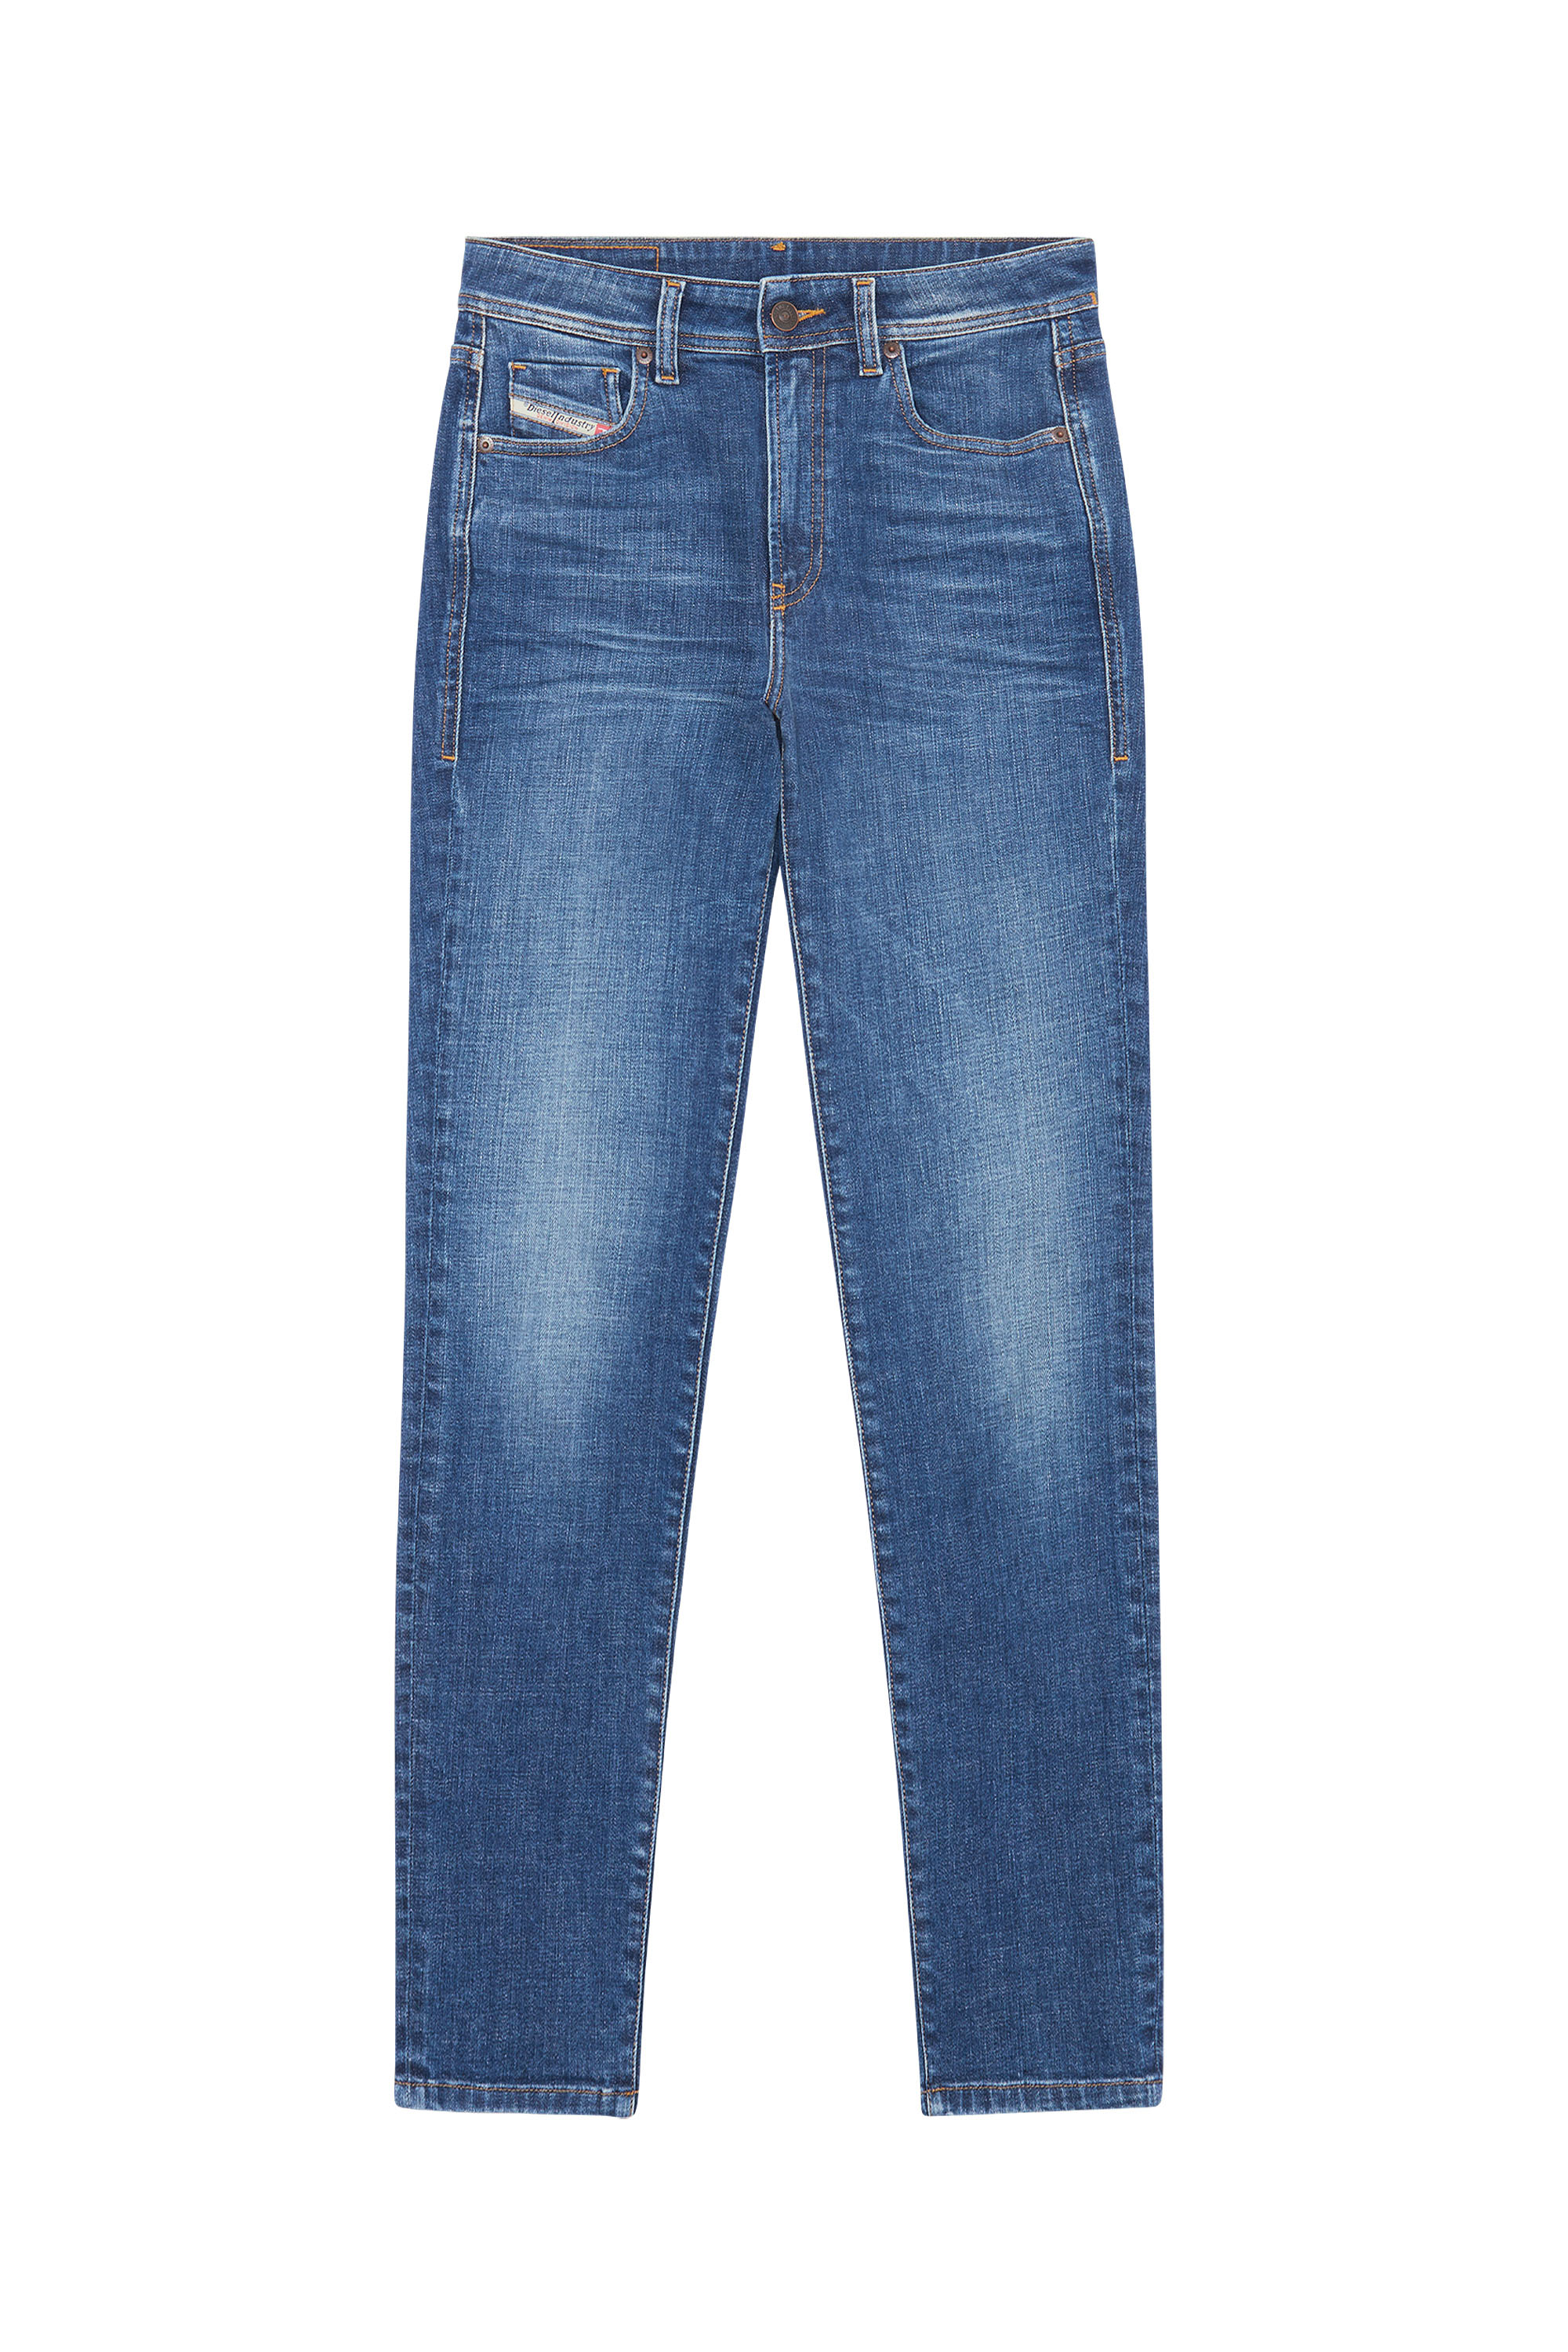 2004 09D46 Tapered Jeans, Mittelblau - Jeans